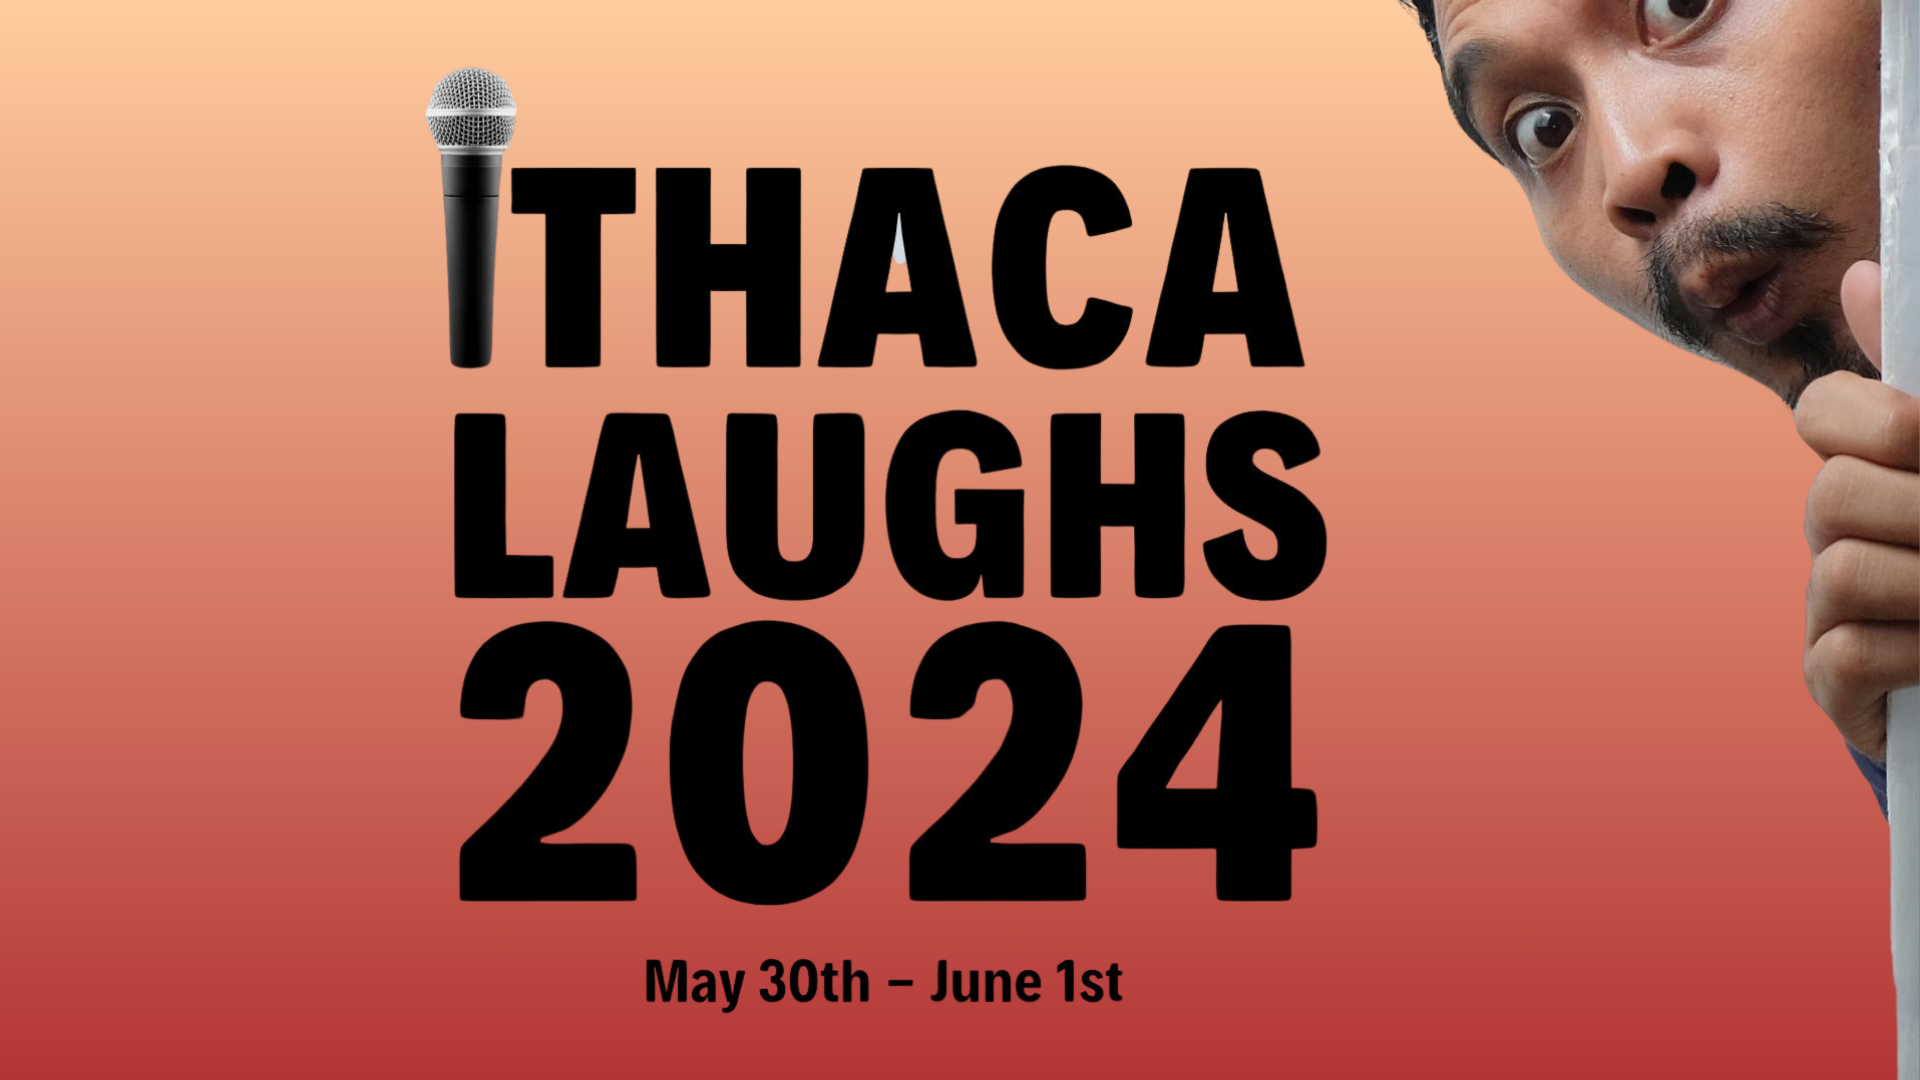 Grand Finale: The Best of Ithaca Comedy